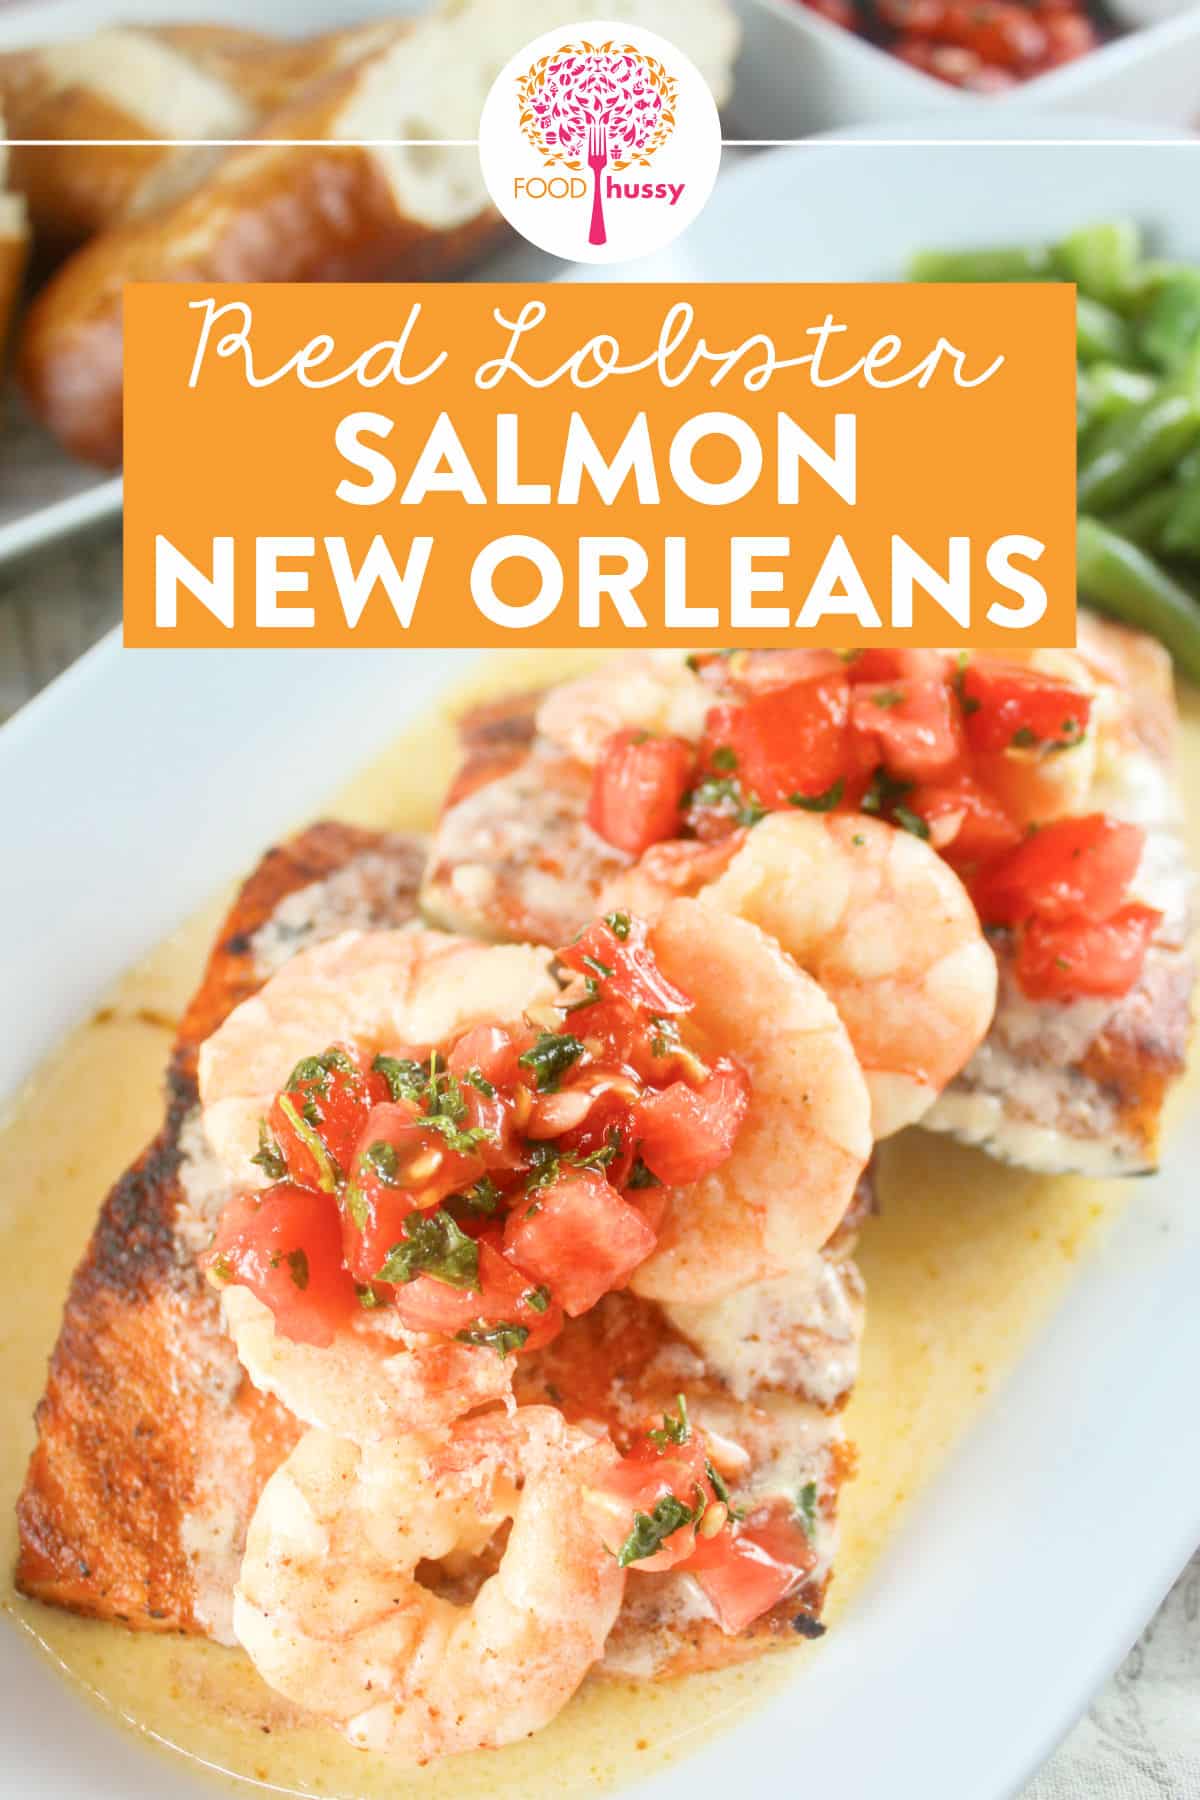 Red Lobster Salmon New Orleans is a delicious dinner choice that features blackened Atlantic salmon topped with shrimp tossed in a Cajun butter sauce, with tomato-cilantro relish. Bonus: it's quick and easy to make at home! via @foodhussy